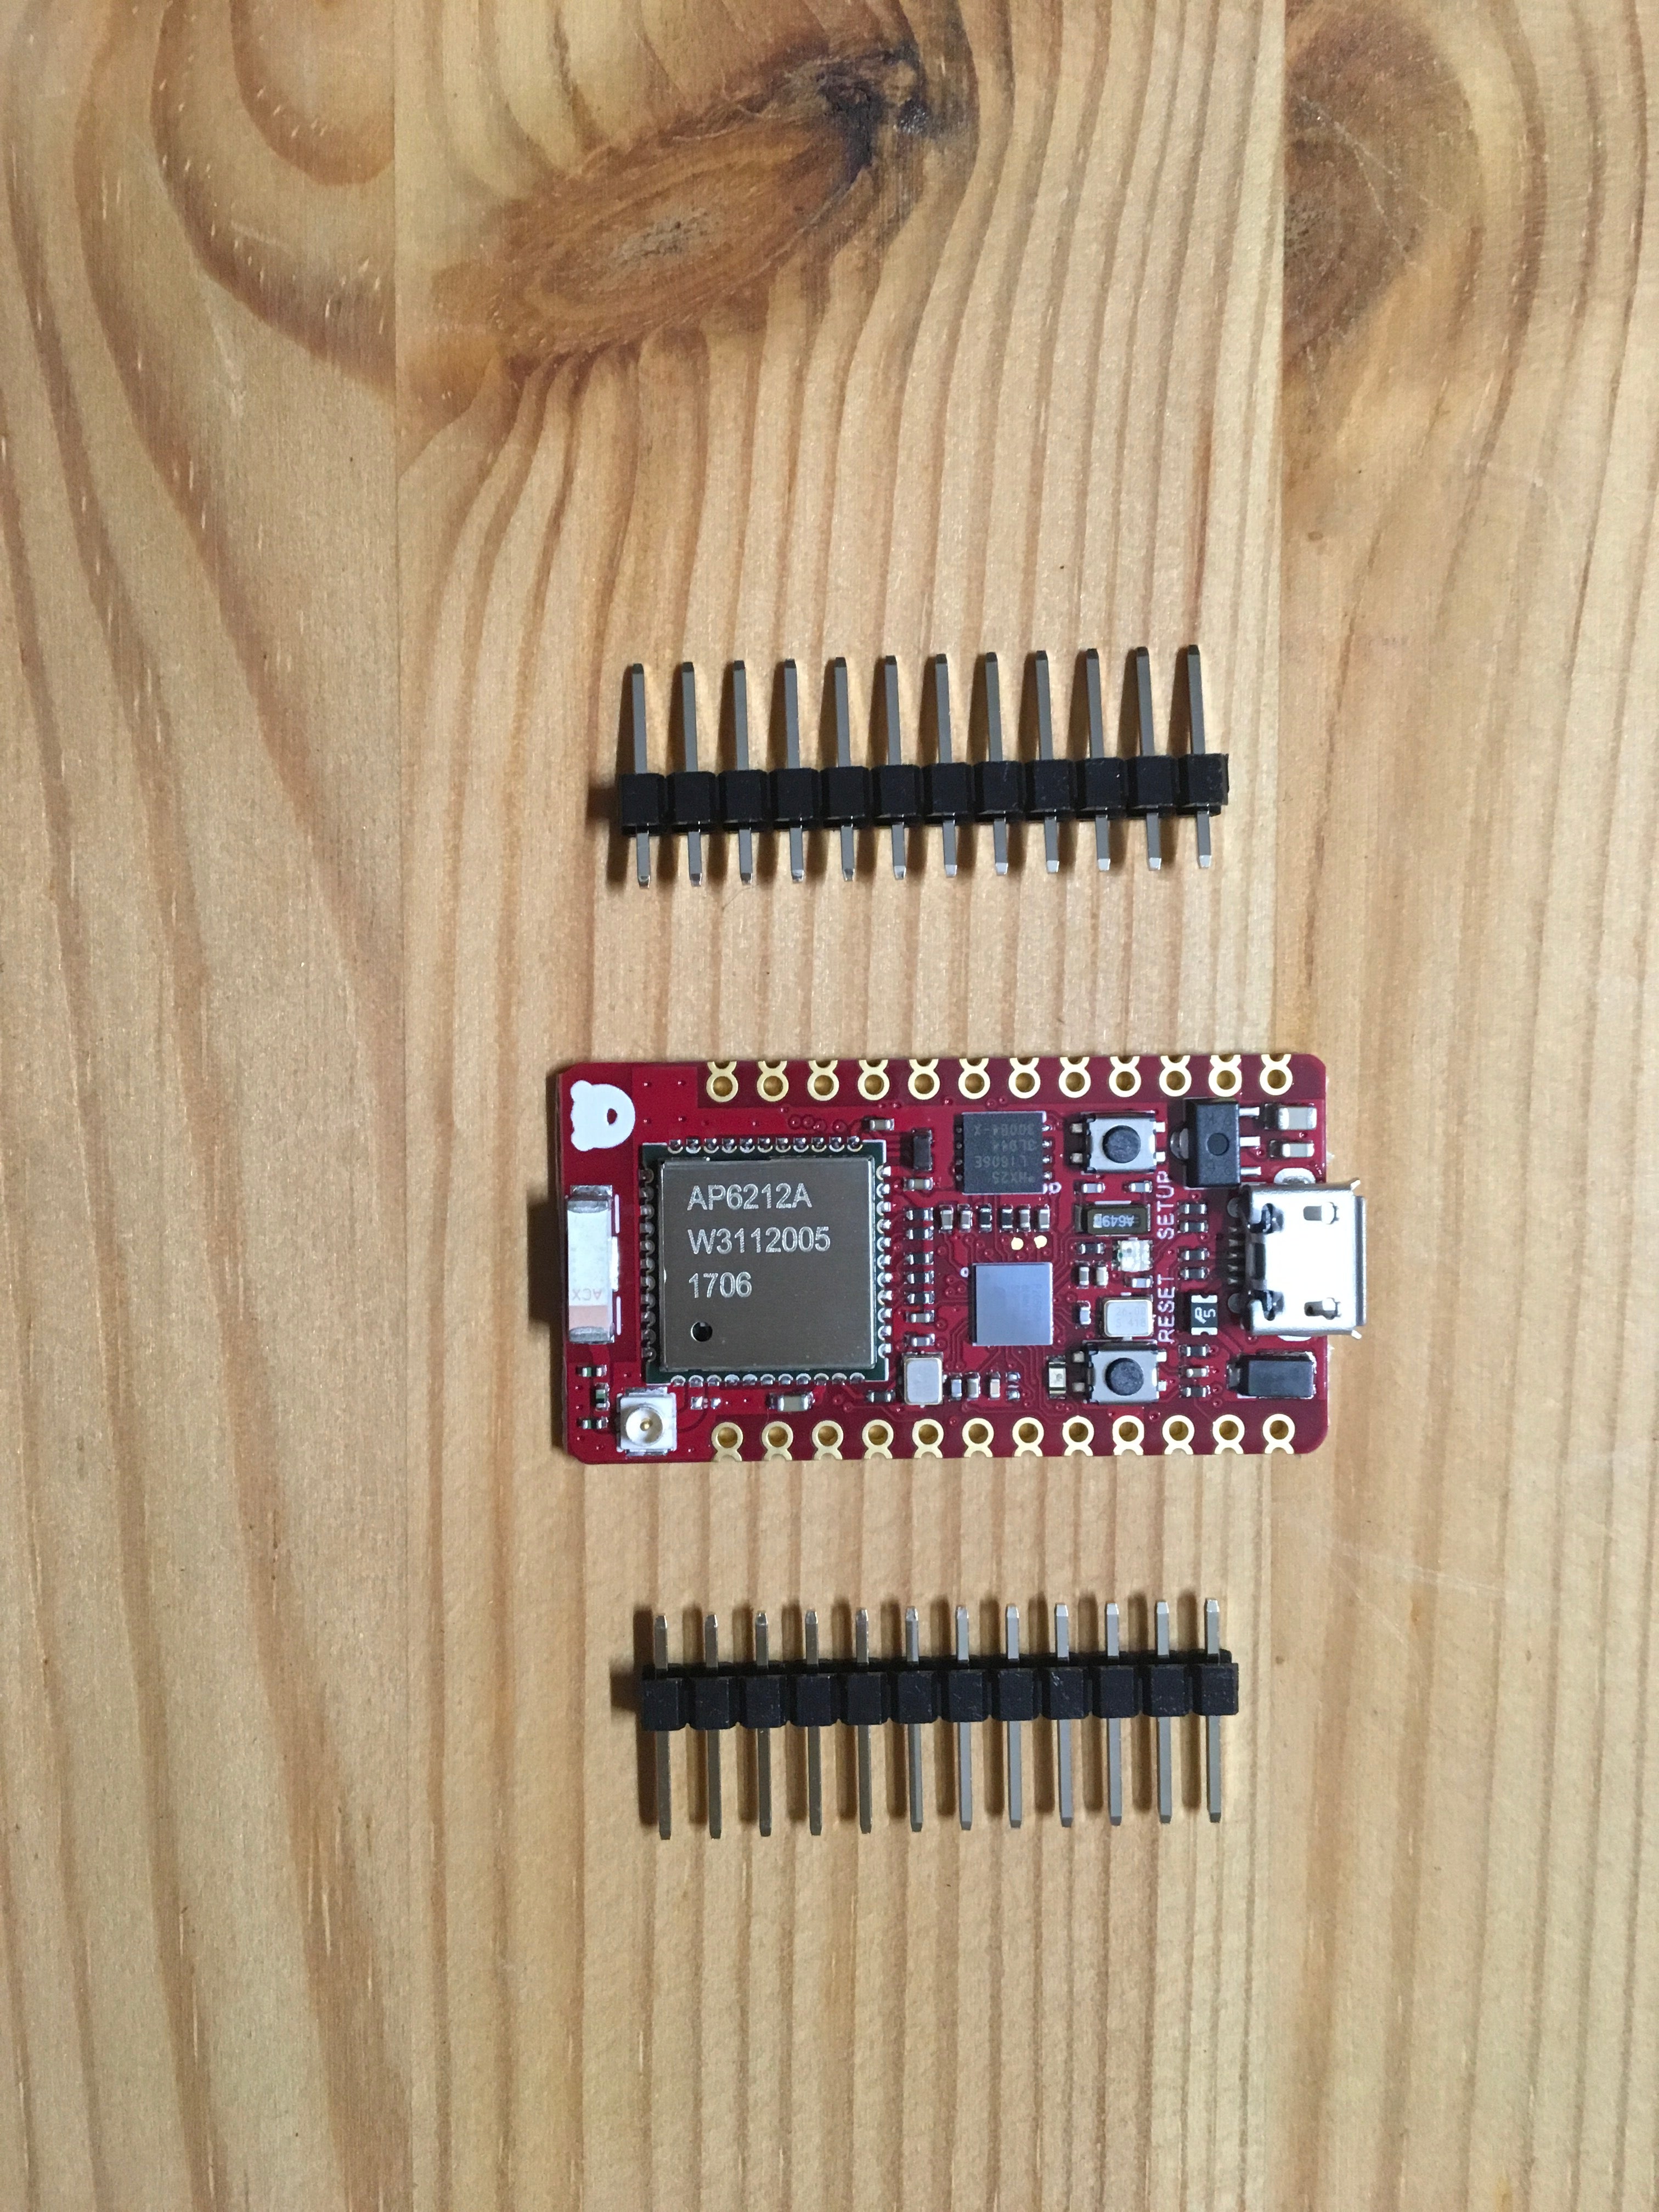 RedBear Duo - with Wifi & BLE & Particle.io (Cloud) - Development Board - Server On The Move